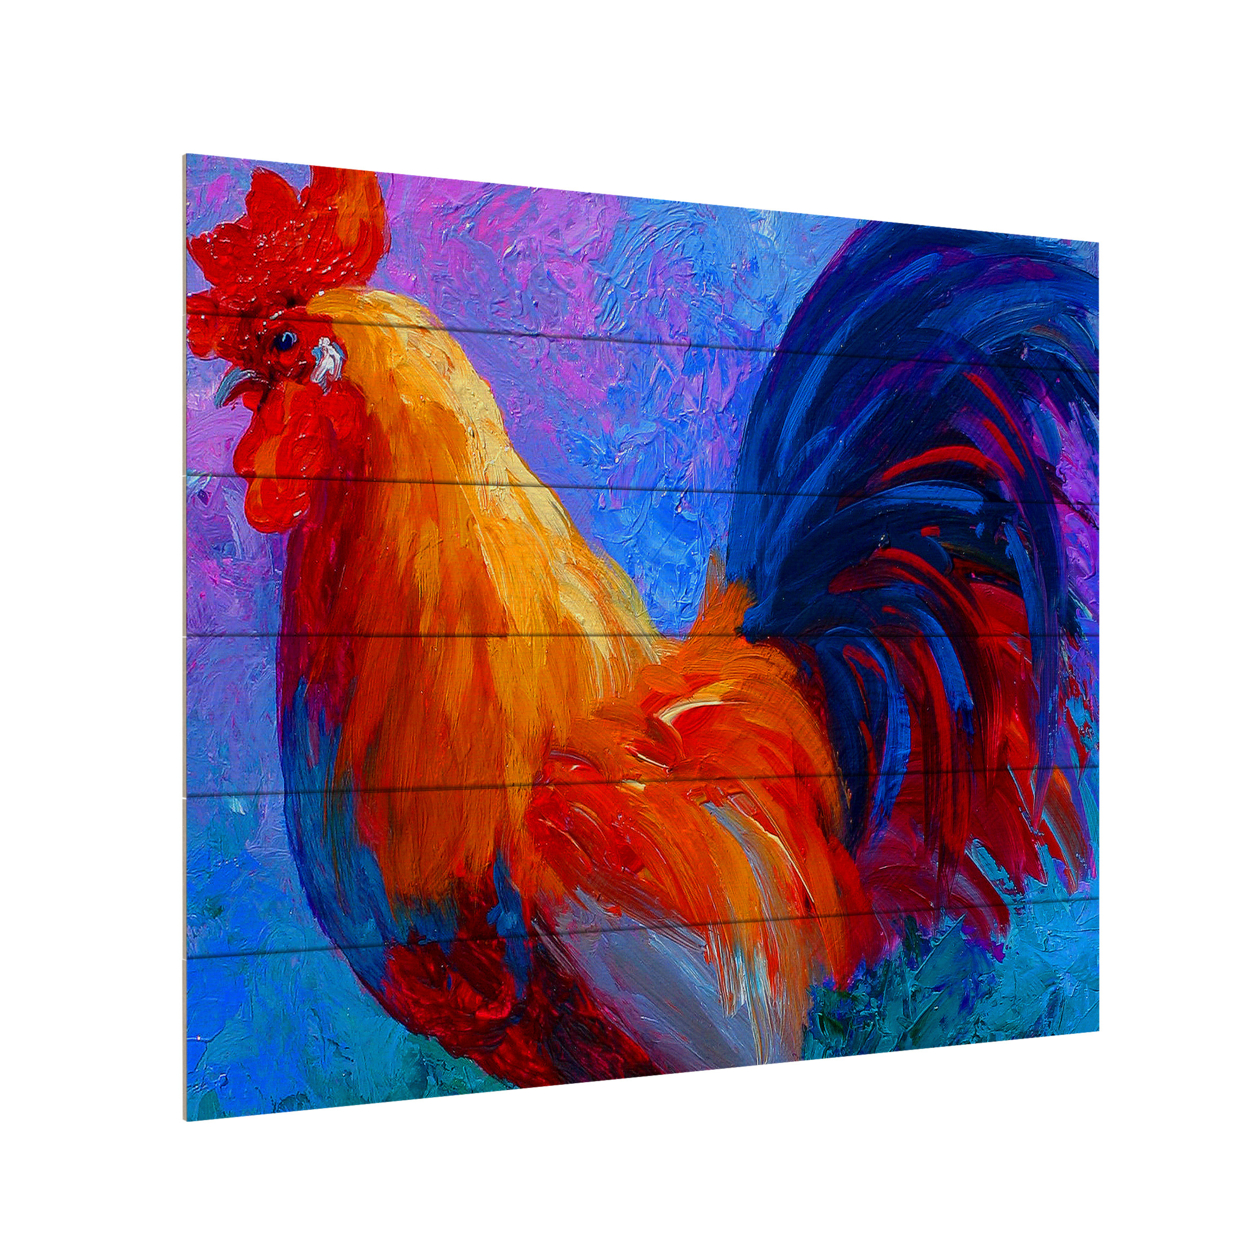 Wooden Slat Art 18 X 22 Inches Titled Rooster Bob 1 Ready To Hang Home Decor Picture